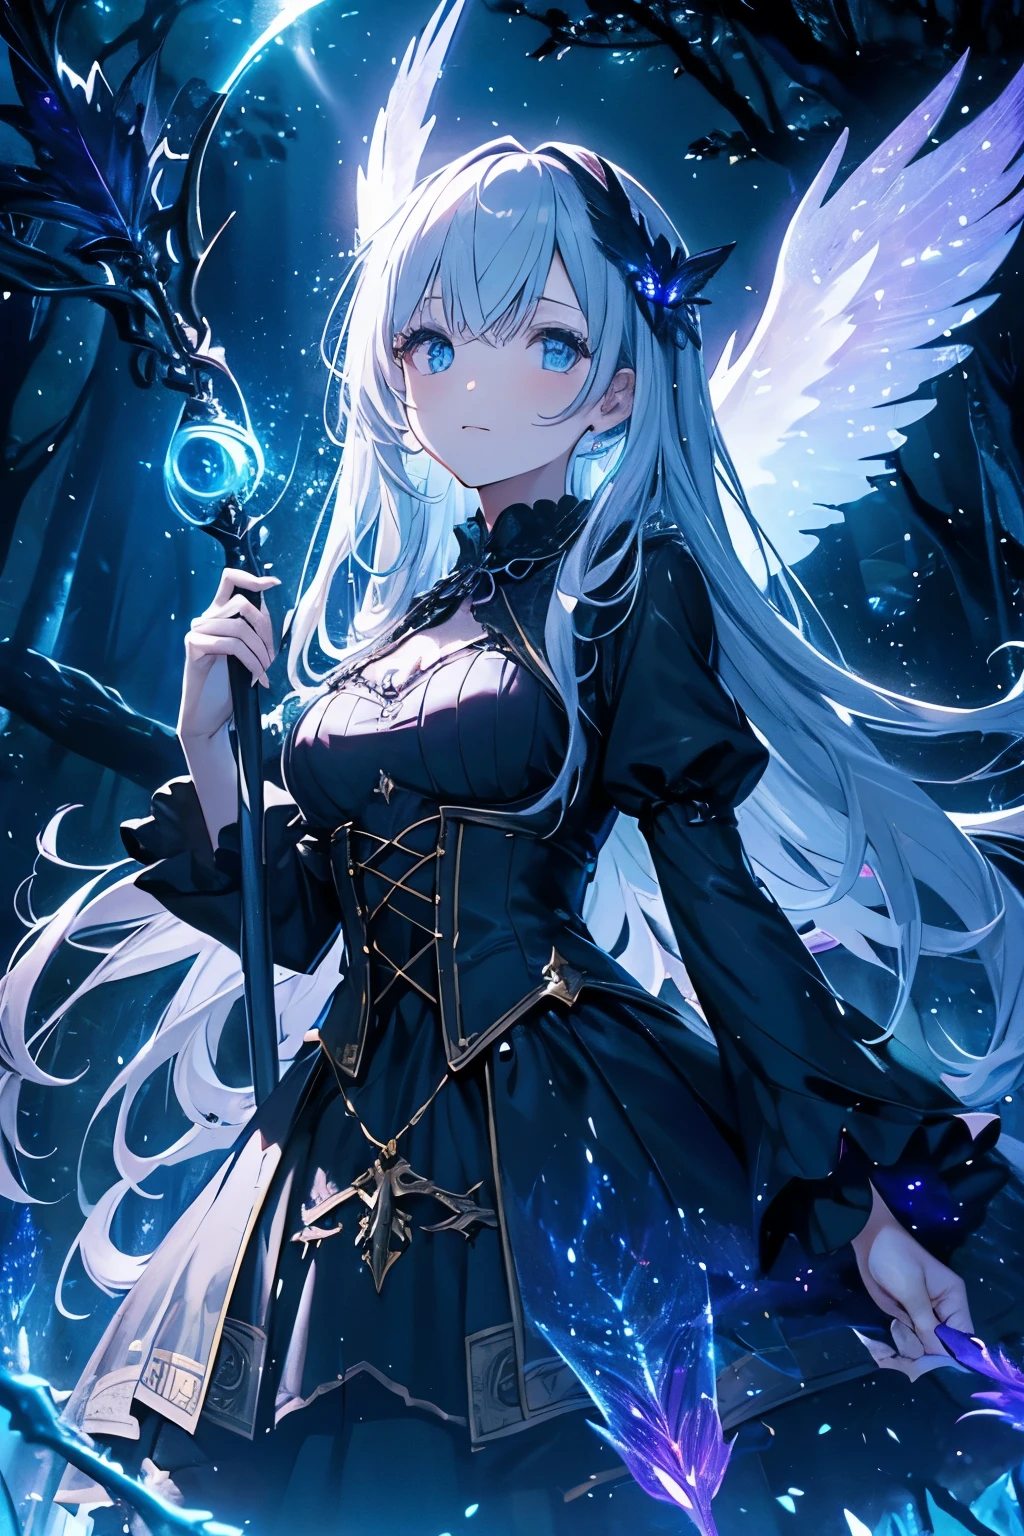 a girl with wings in a dark fantasy forest surrounded by glowing fireflies, holding a magical staff, with a mysterious atomosphere, casting powerful spells, in a moonlit night setting. (best quality, highres, ultra-detailed), (dark fantasy, gothic, mystical) scene, with vibrant colors of deep purple, teal, and gold, illuminated by moonlight and ethereal light rays.